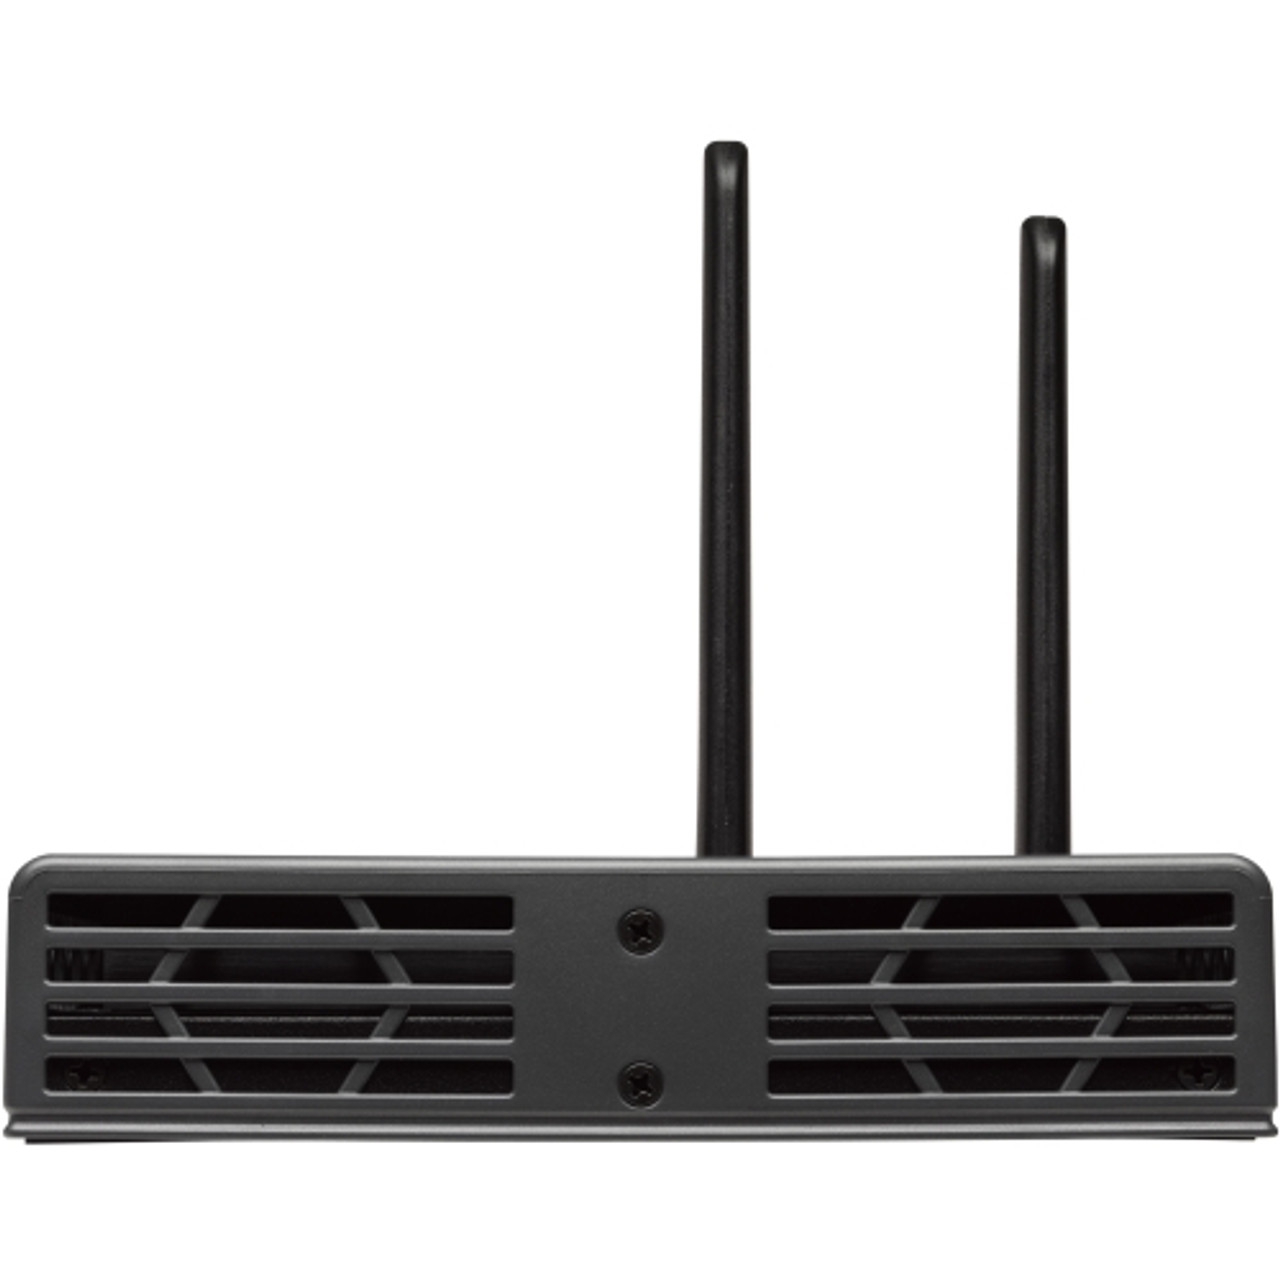 C819HG-4G-A-K9 Cisco 819HG Wireless Integrated Services Router (Refurbished)